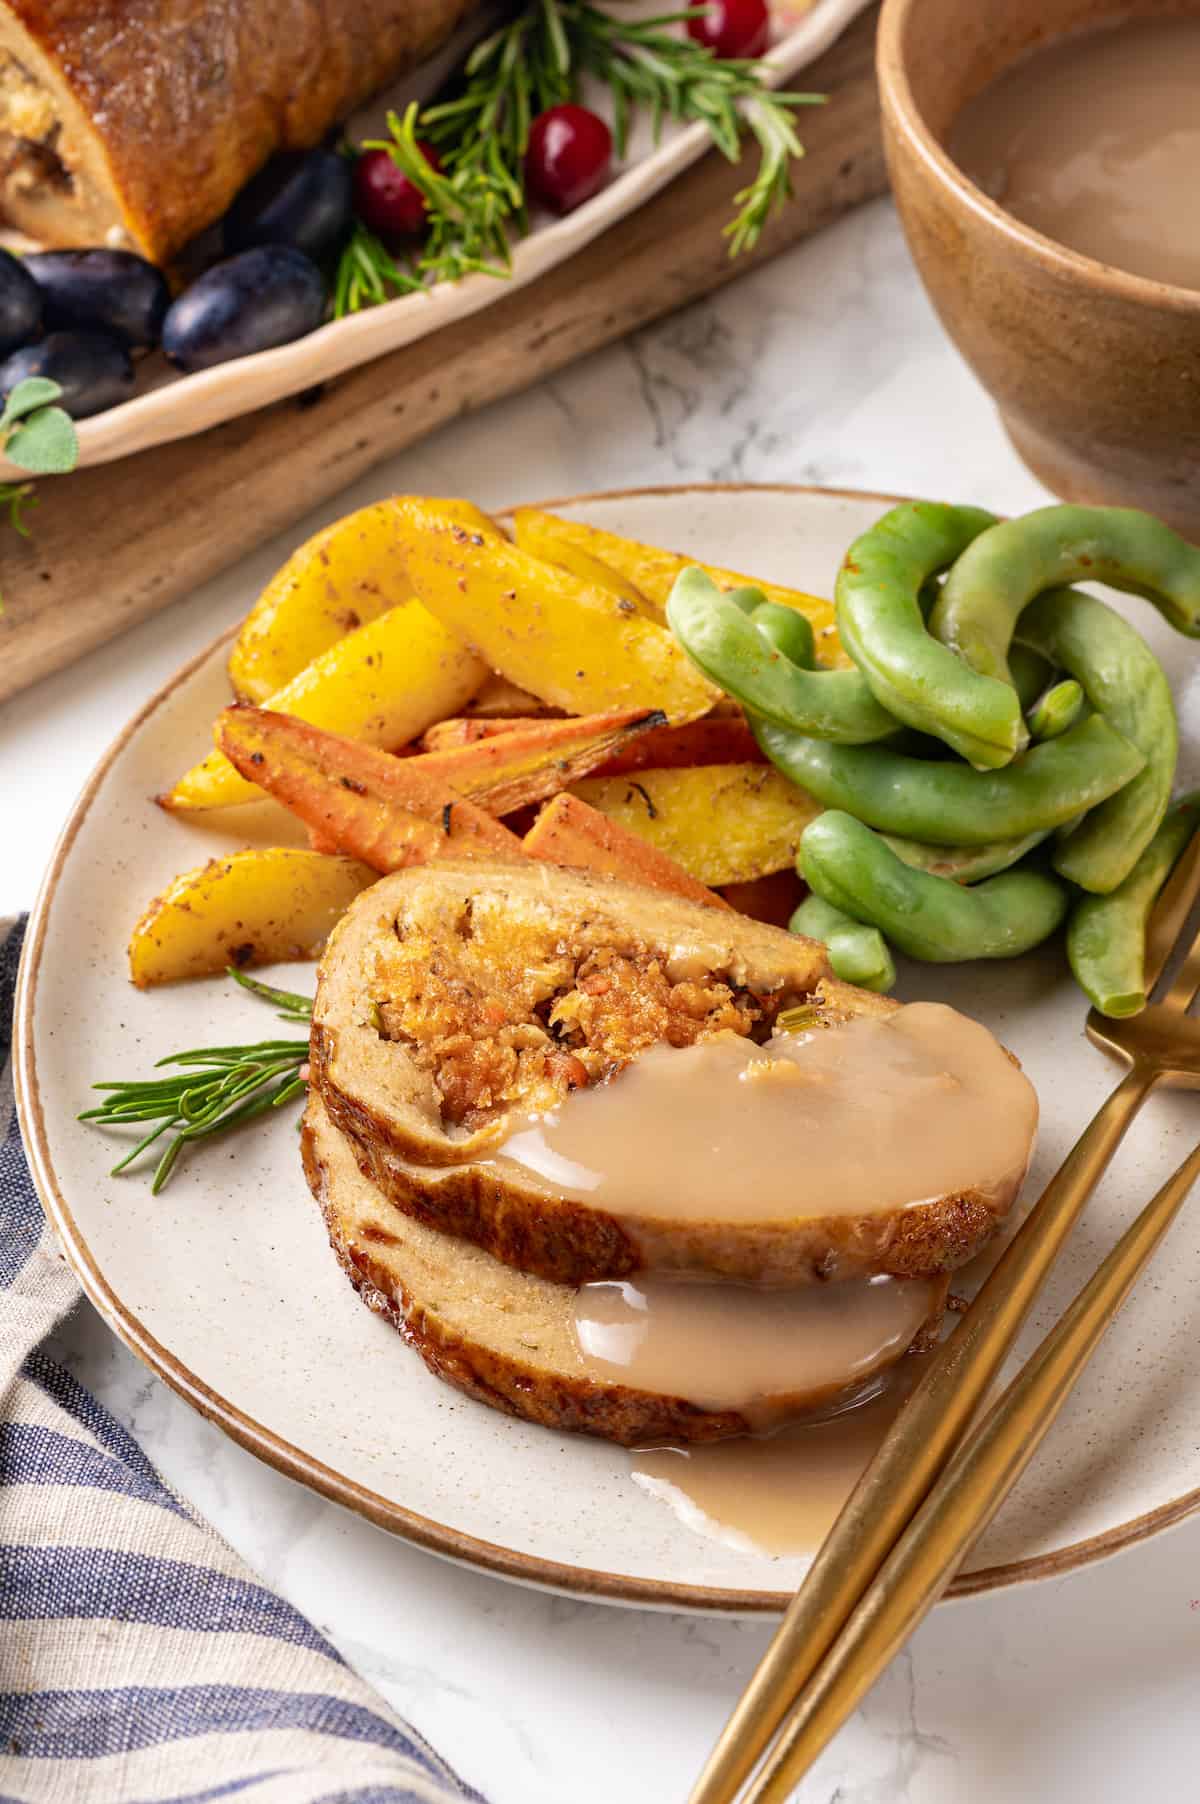 Vegan turkey slices on plate with gravy, roasted vegetables, and edamame